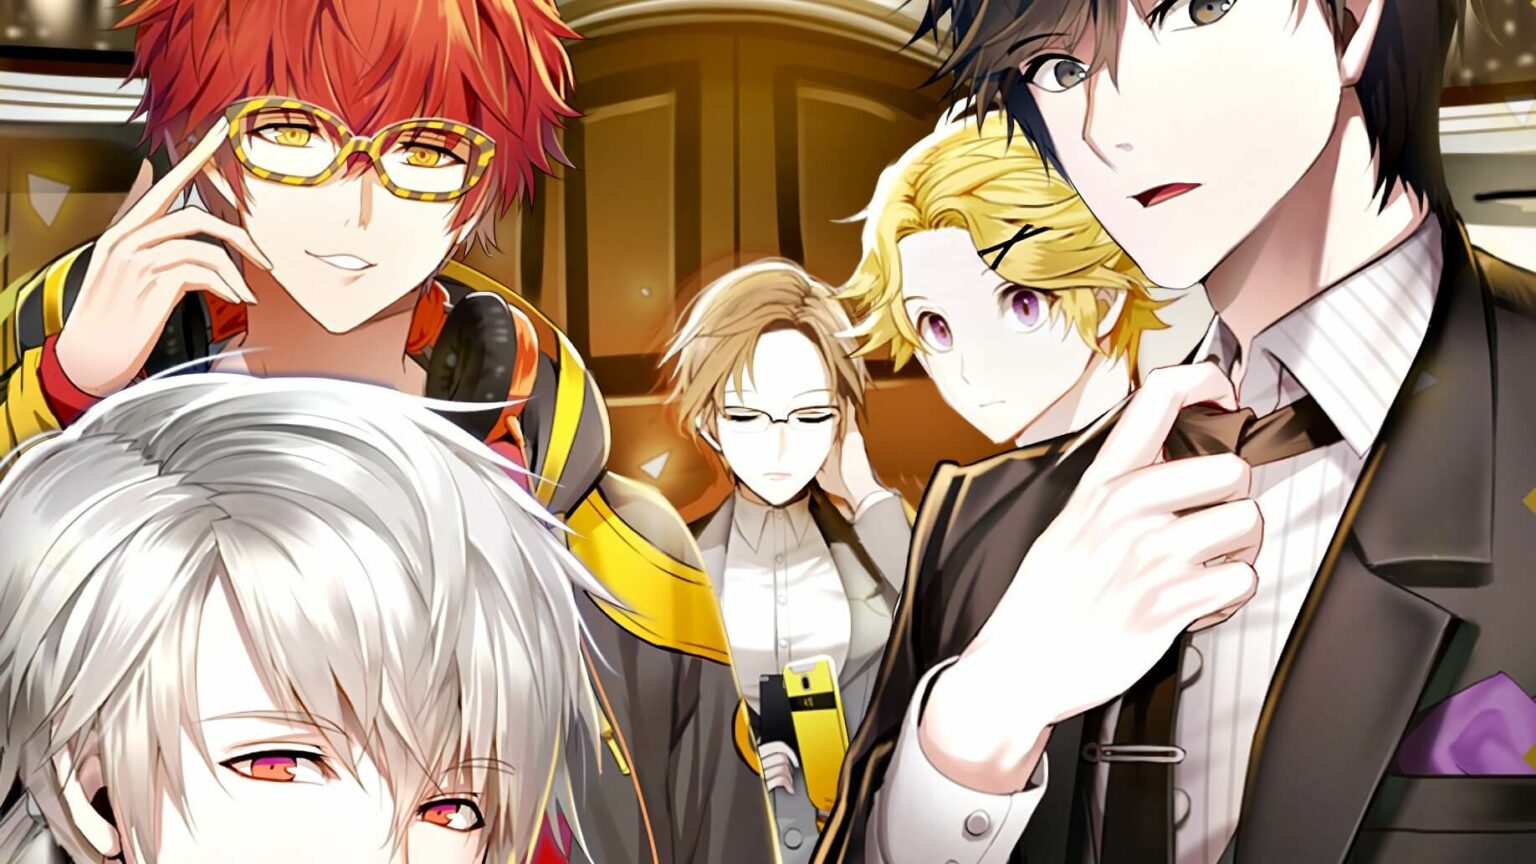 mystic messenger education email